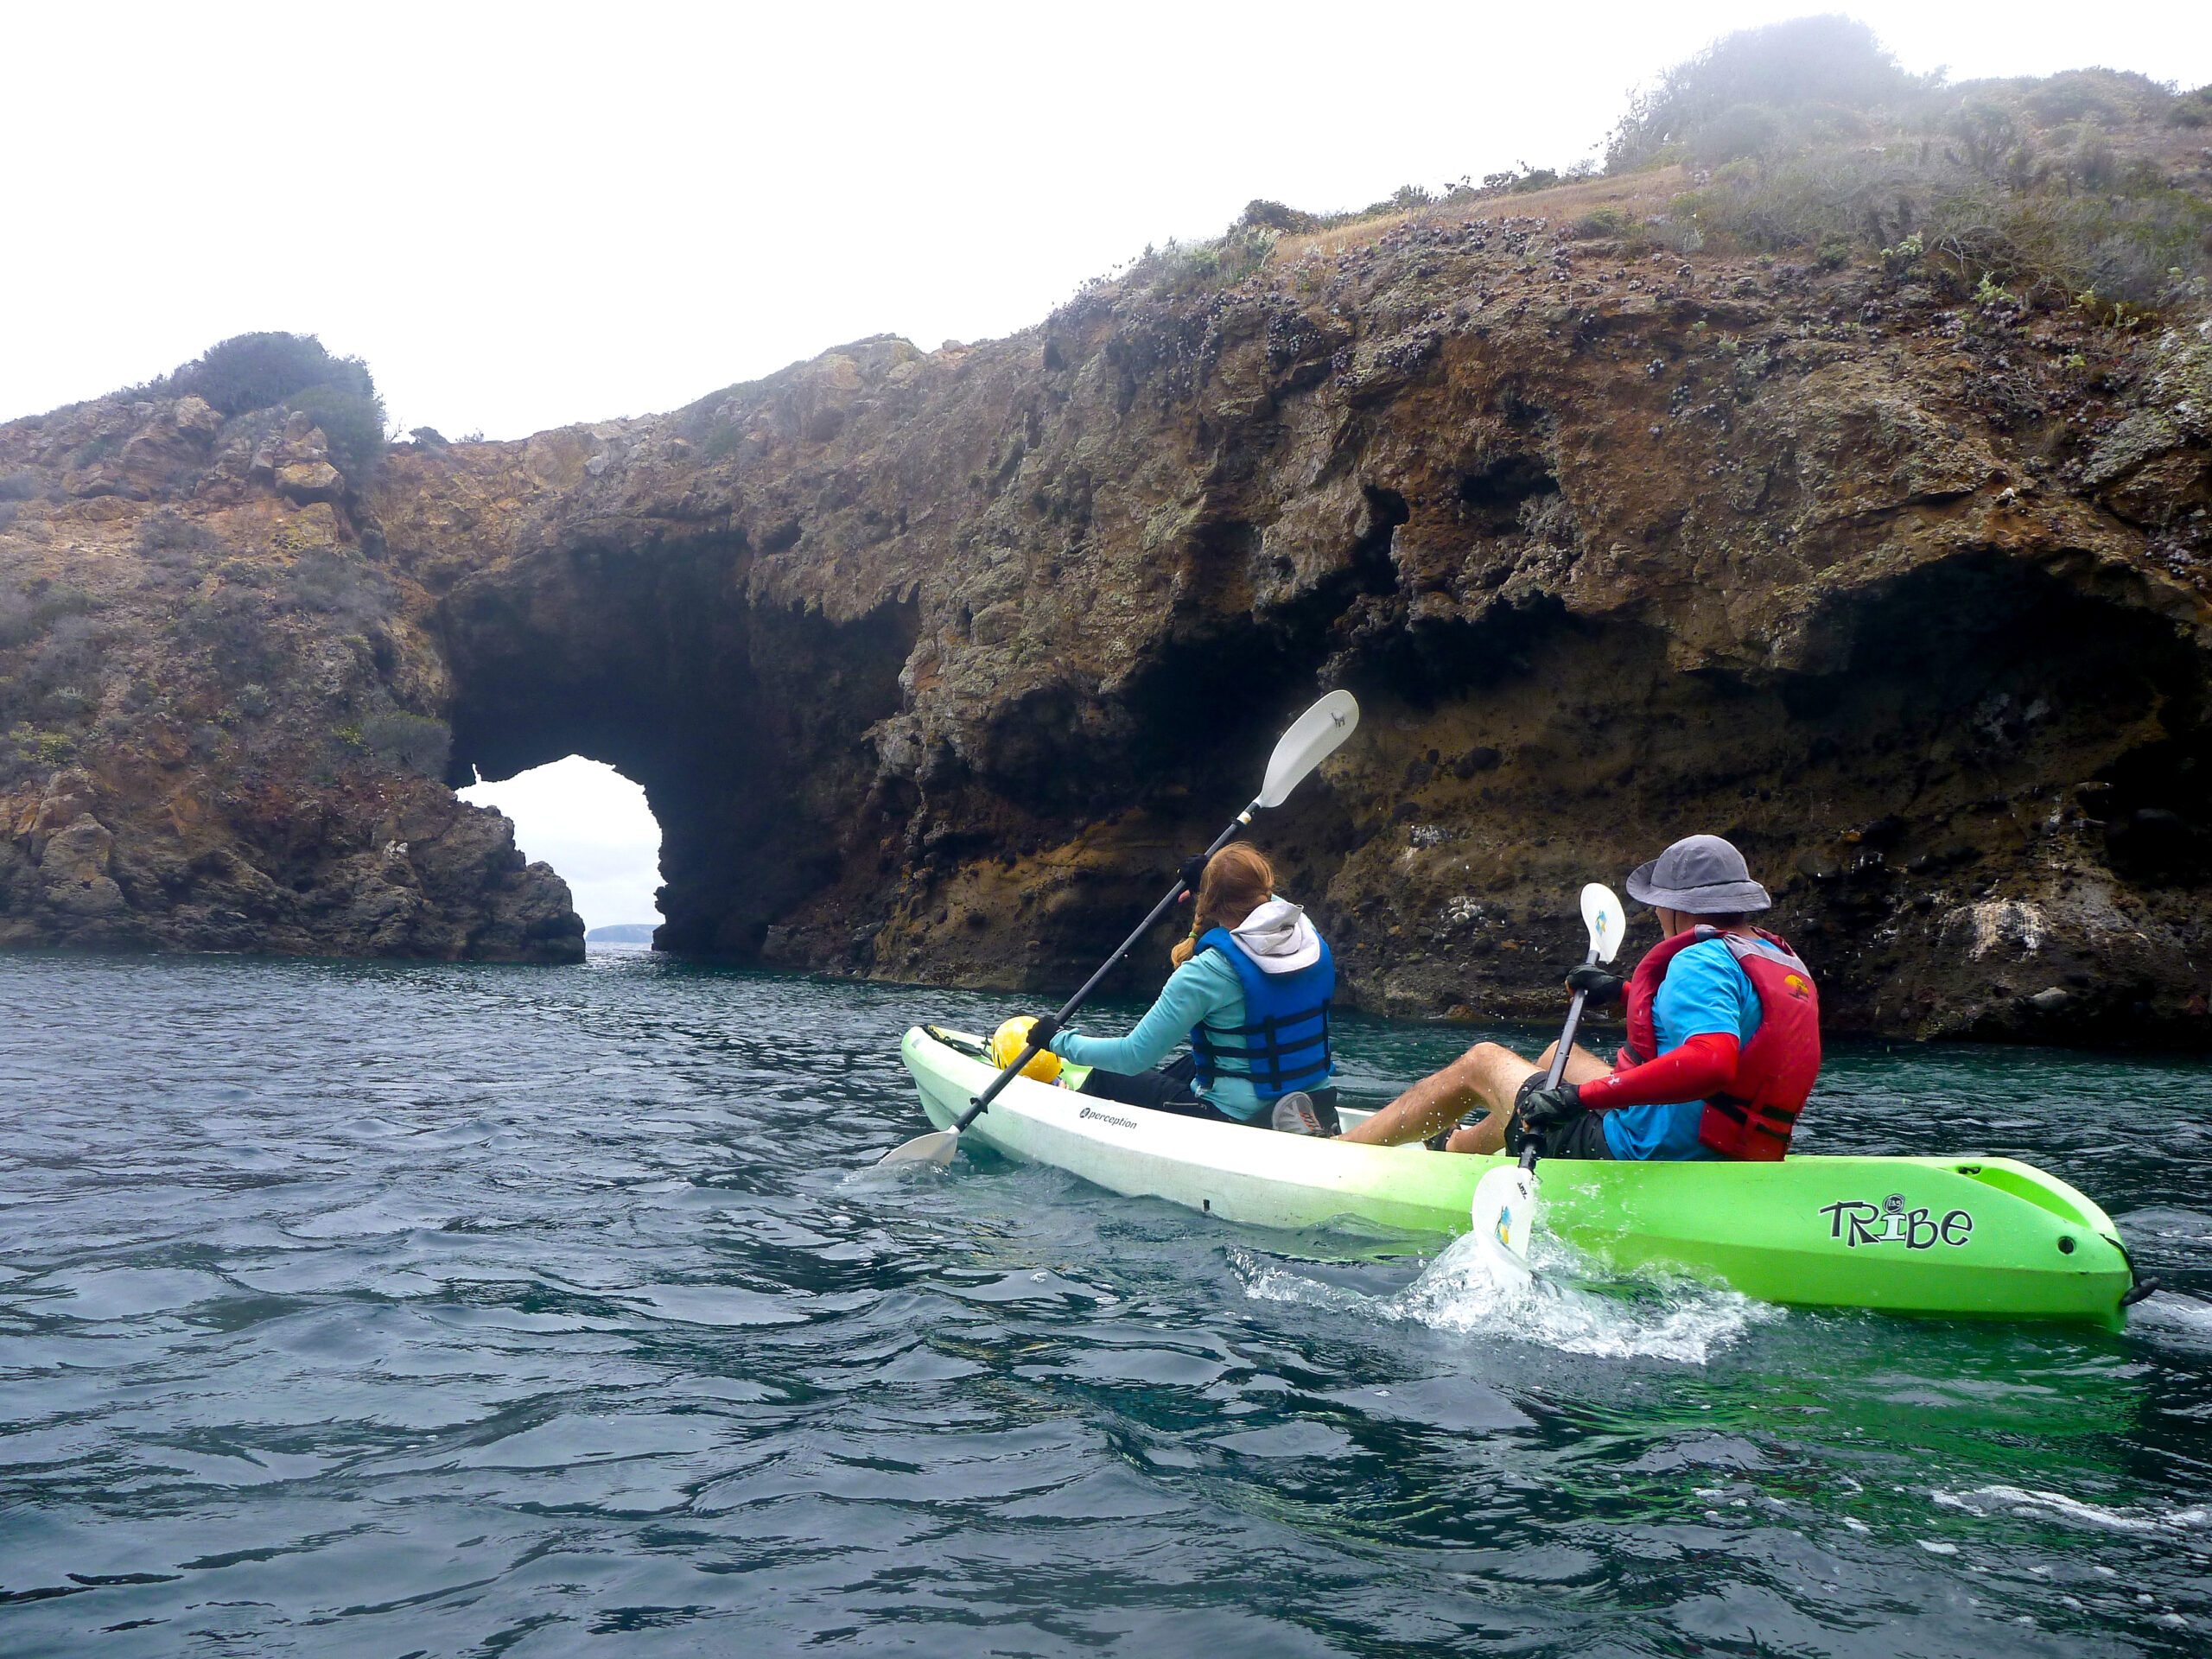 Kayakers get ready to paddle under an archway near Pelican Bay on Santa Cruz Island, California.